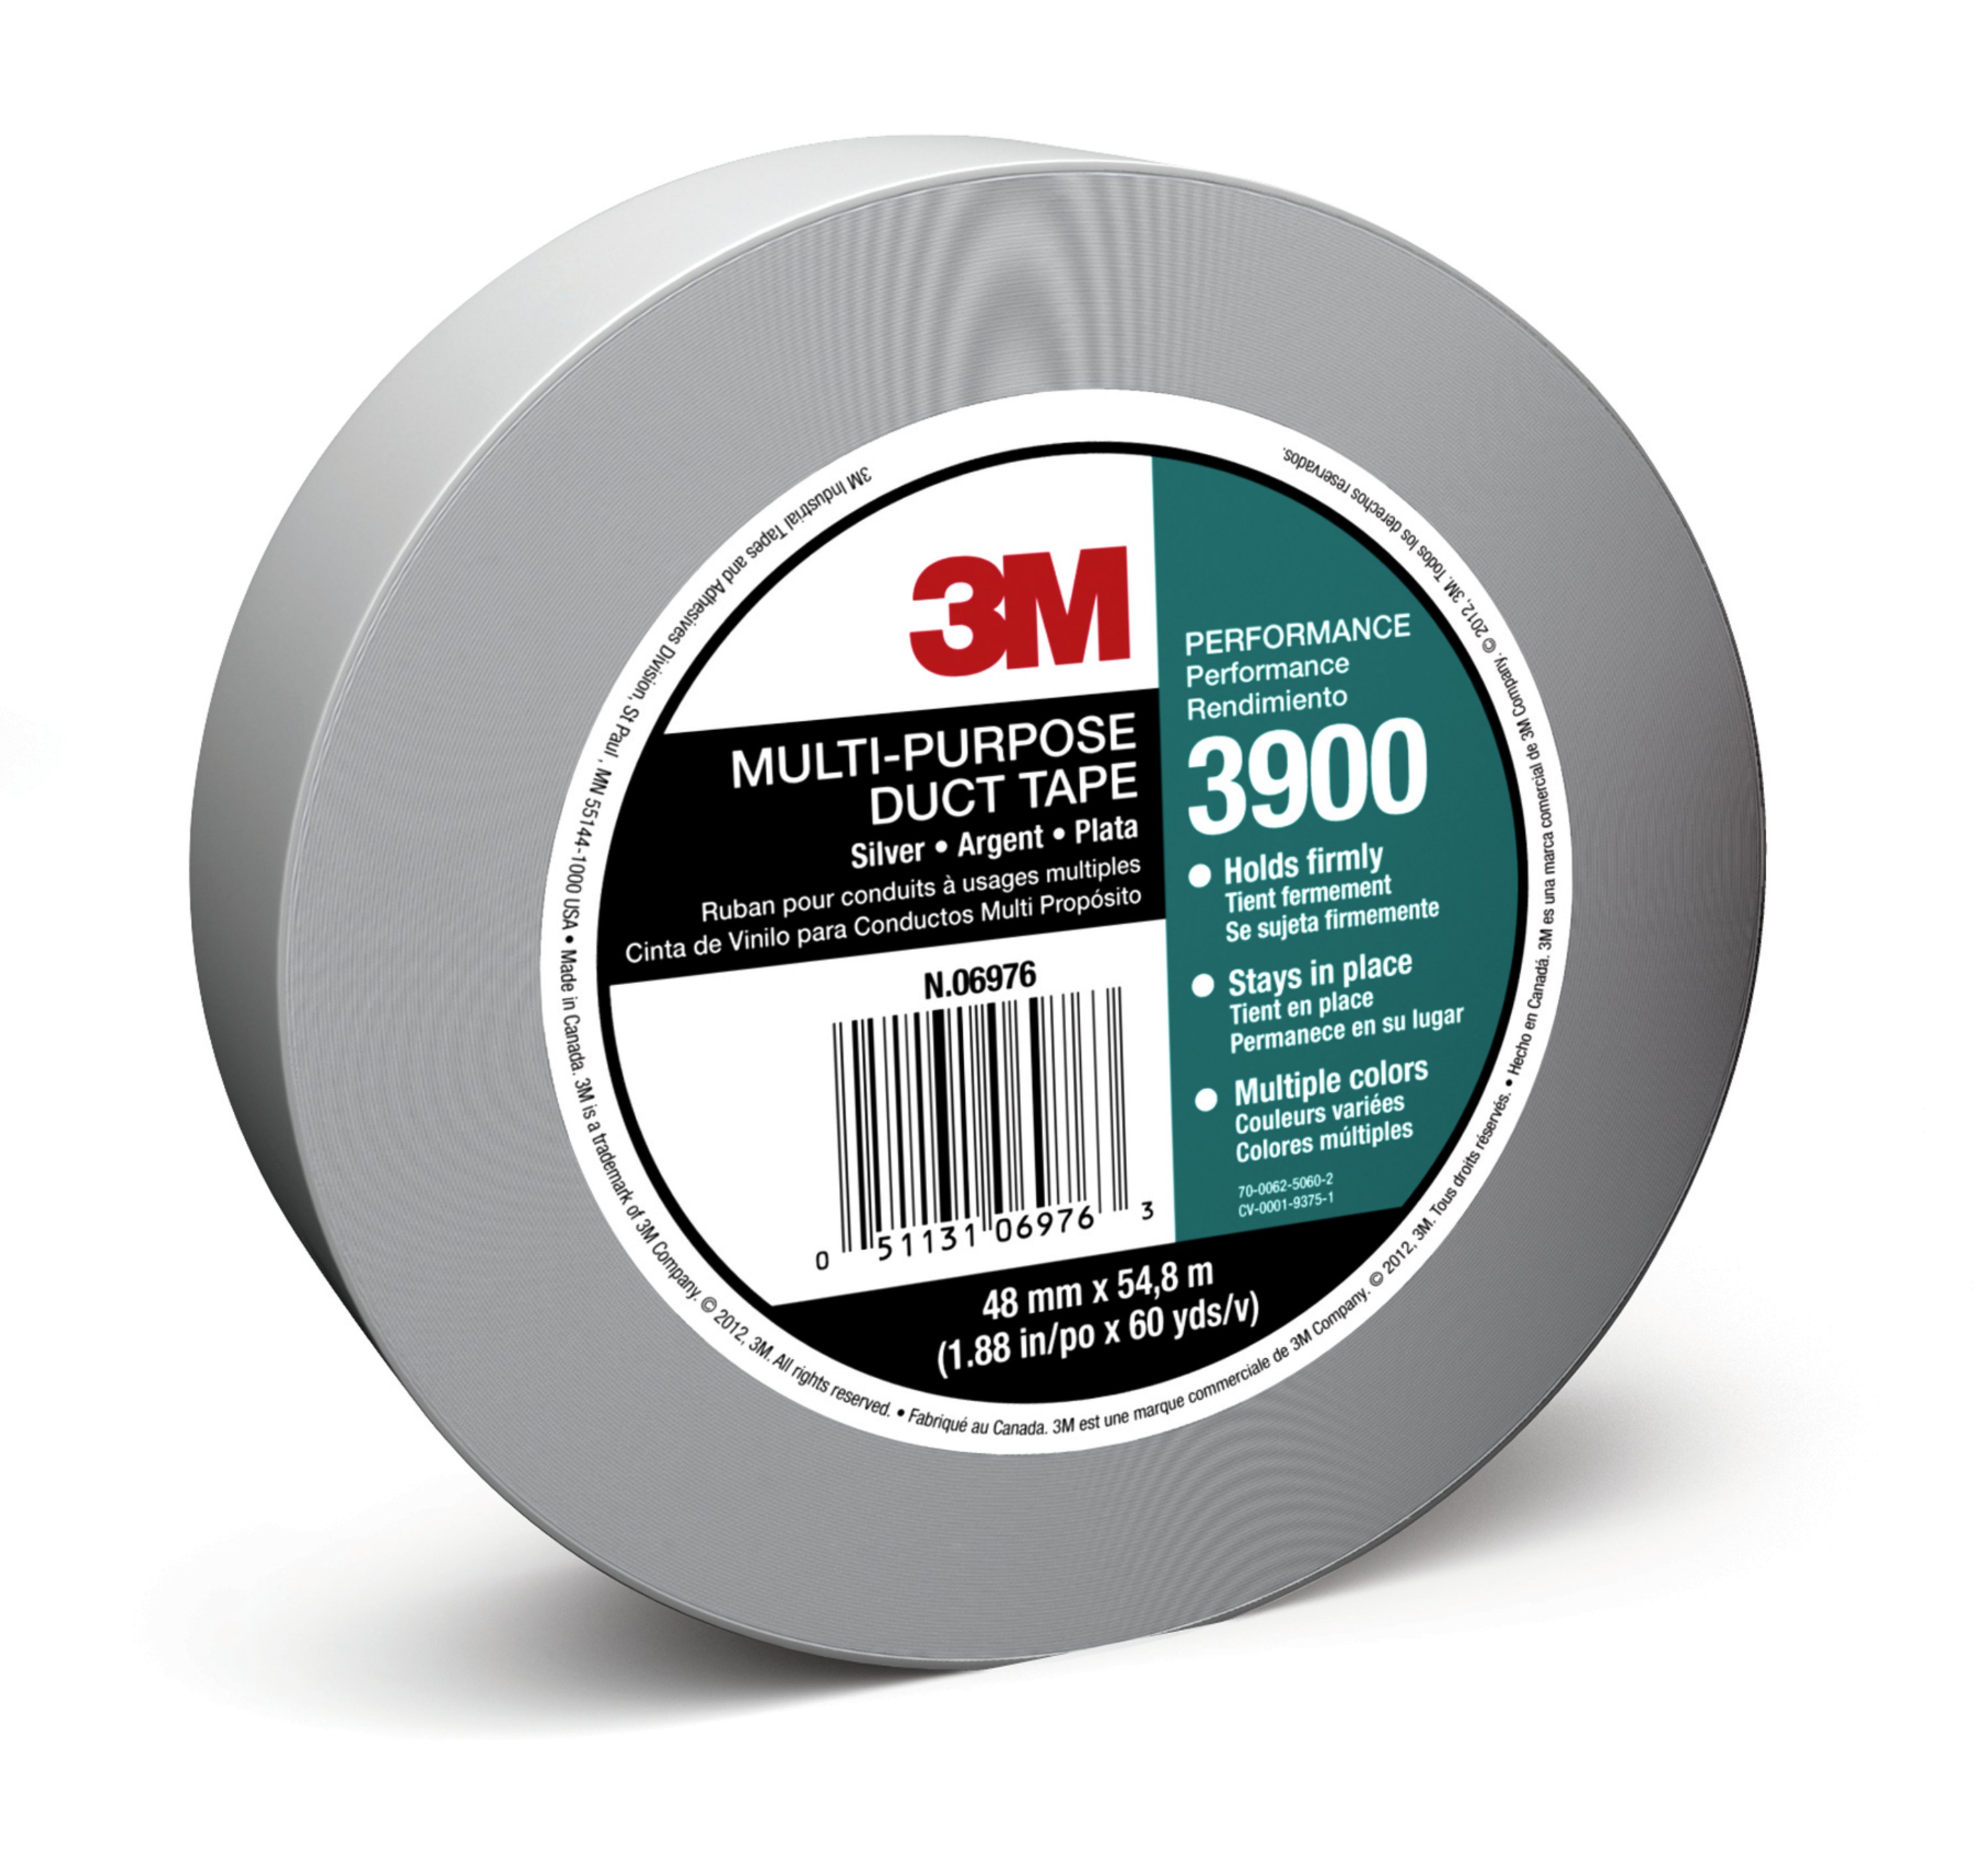 Multi-Purpose Duct Tape 3900 comes in an array of colors for process tagging, marking, highlighting hazards, color coding, identification and visual enhancement.